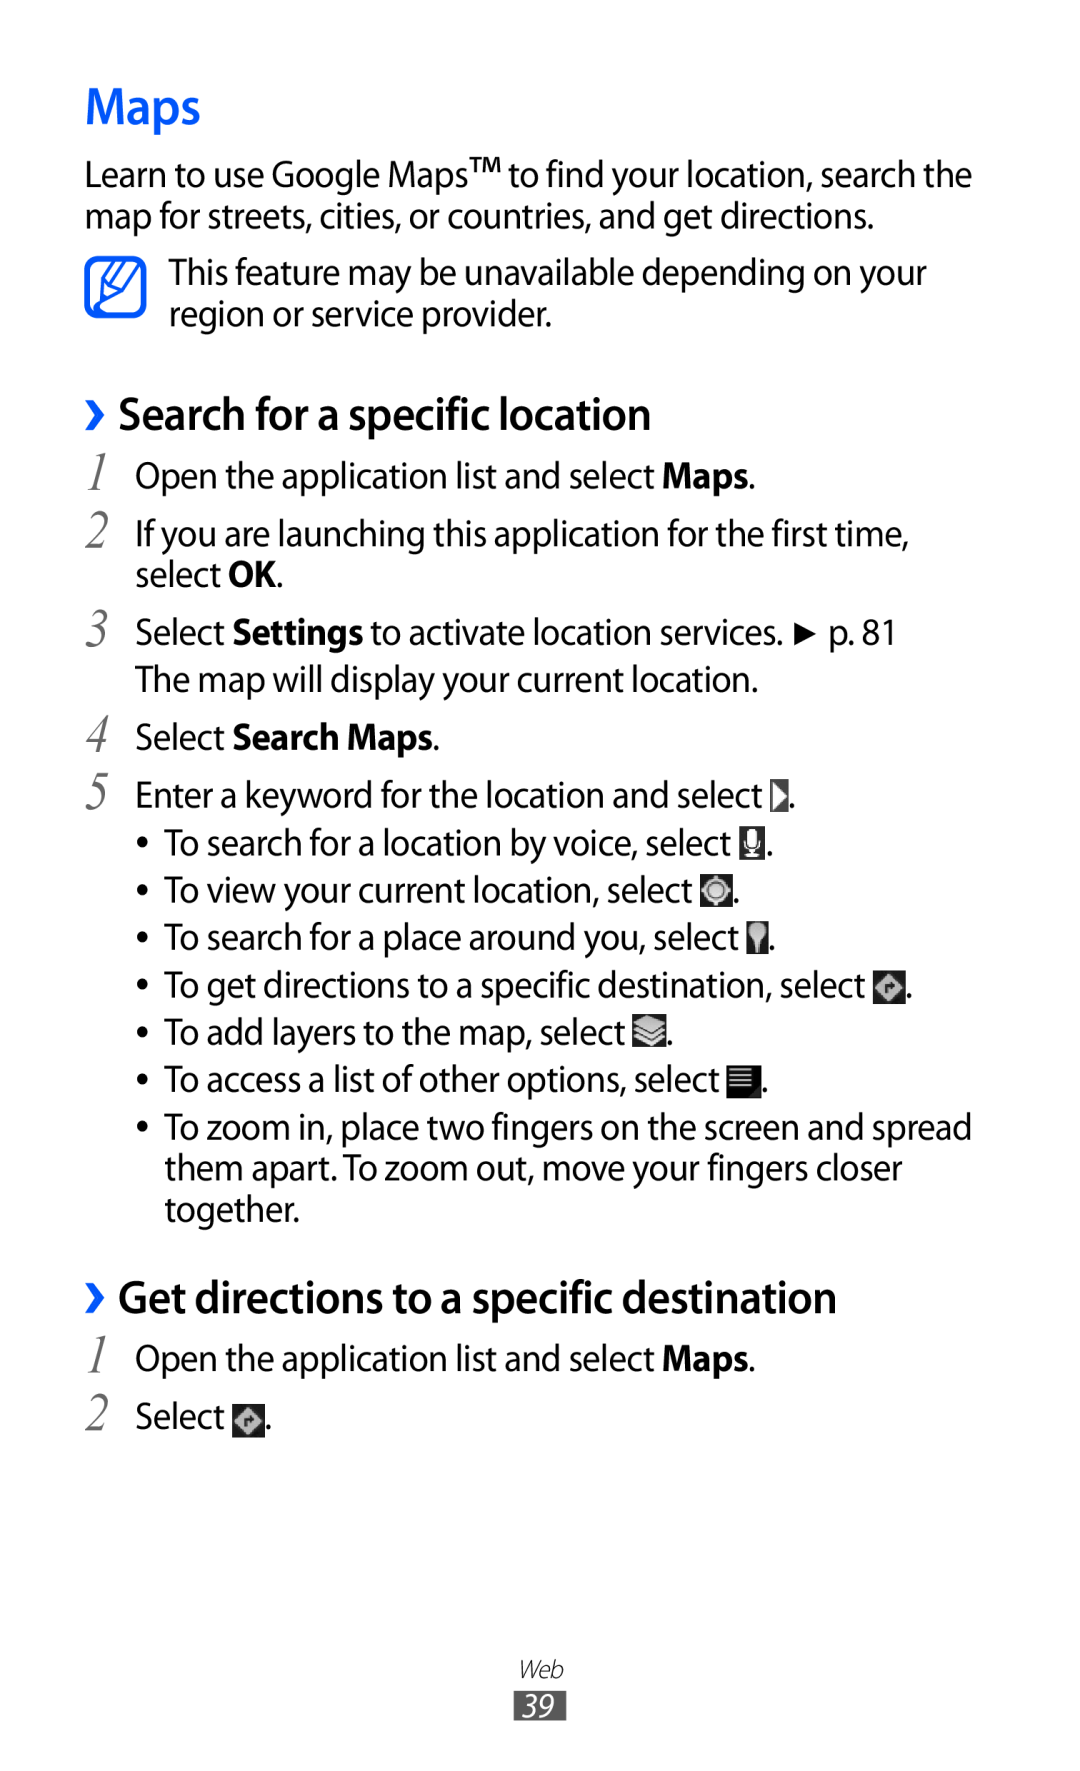 Samsung GT-P7310UWAXSK, GT-P7310FKEXEF Maps, ››Search for a specific location, ››Get directions to a specific destination 